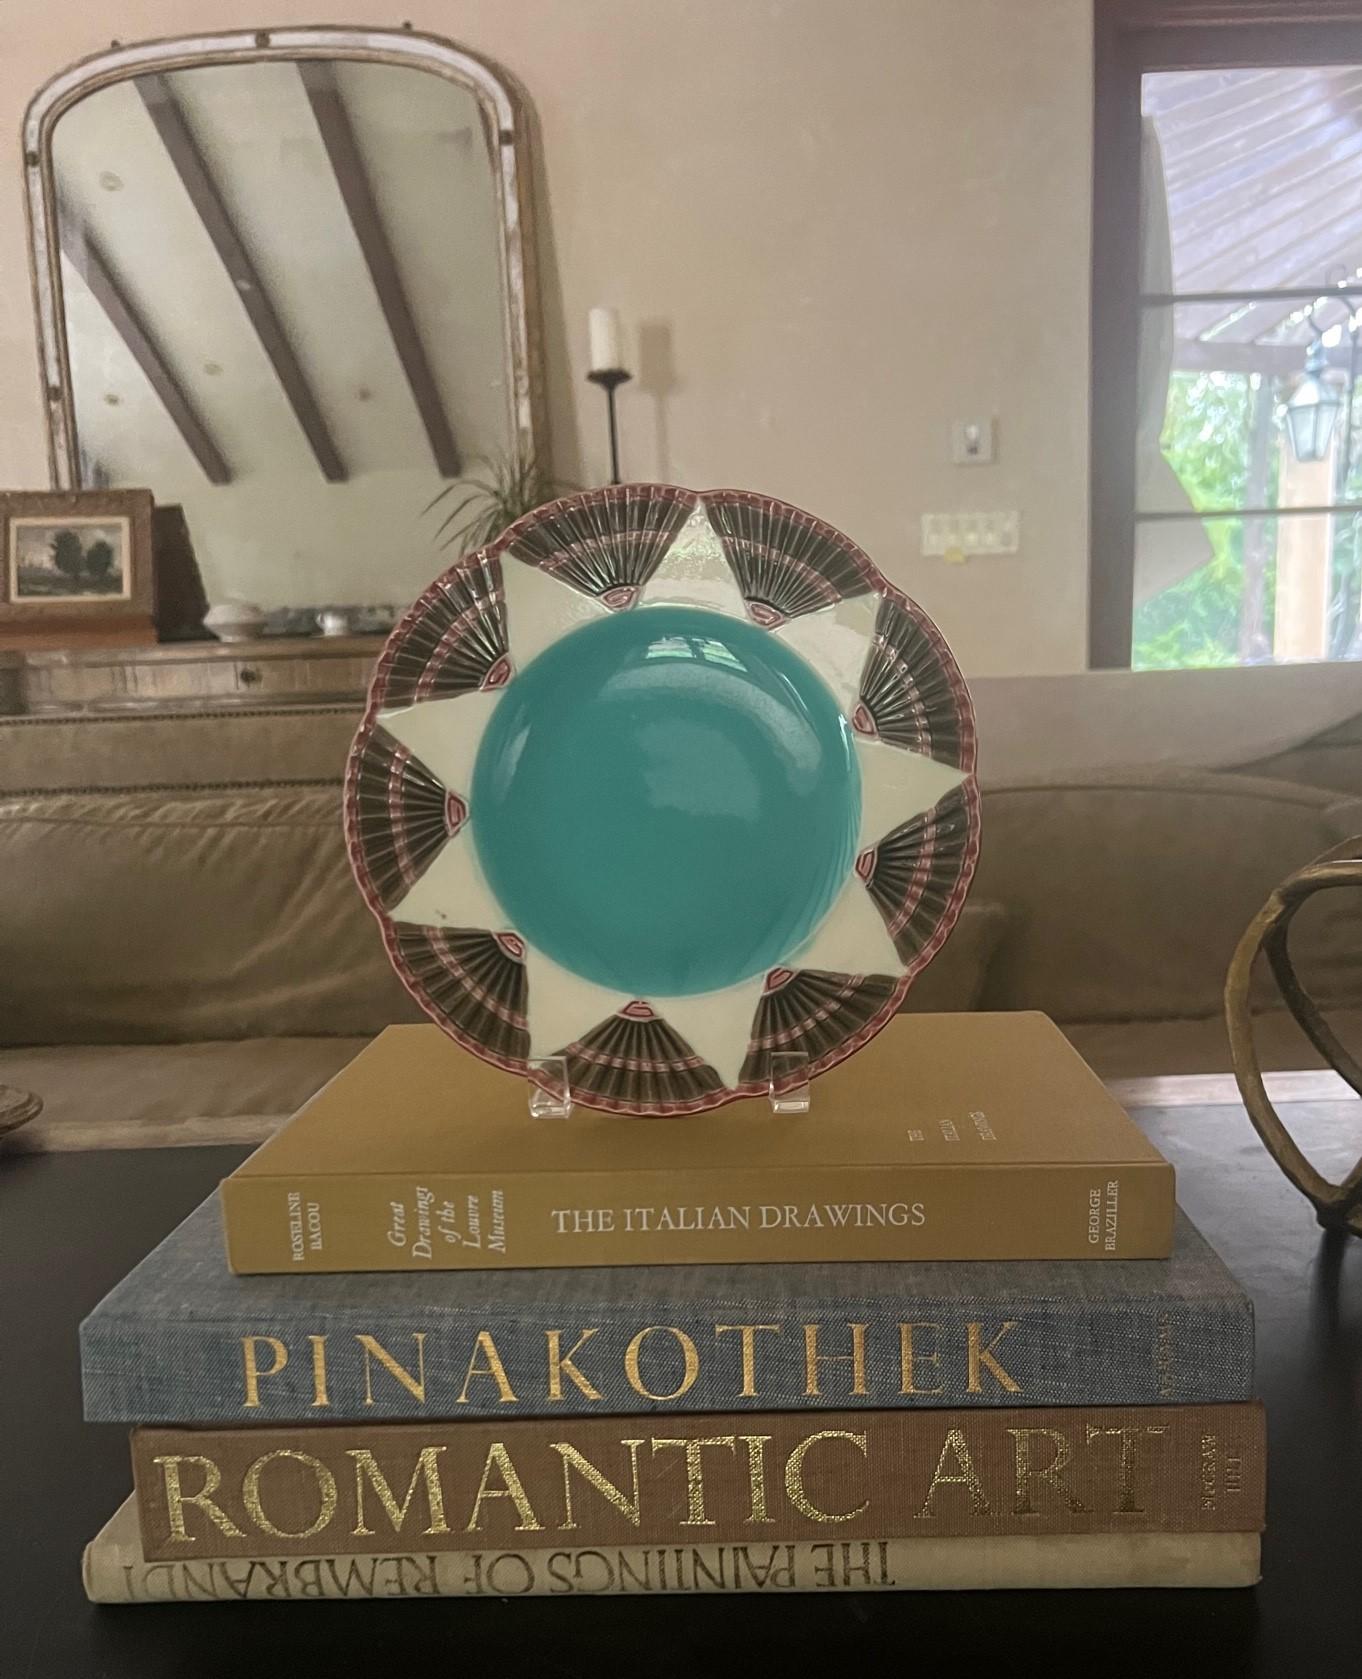 19th Century plate made in England by Wedgwood, the pattern, part of the Fan collection is called Argenta Chicago. It has a turquoise center surrounded by a star pattern and fans. 

In 1879, nineteen years after it first started majolica